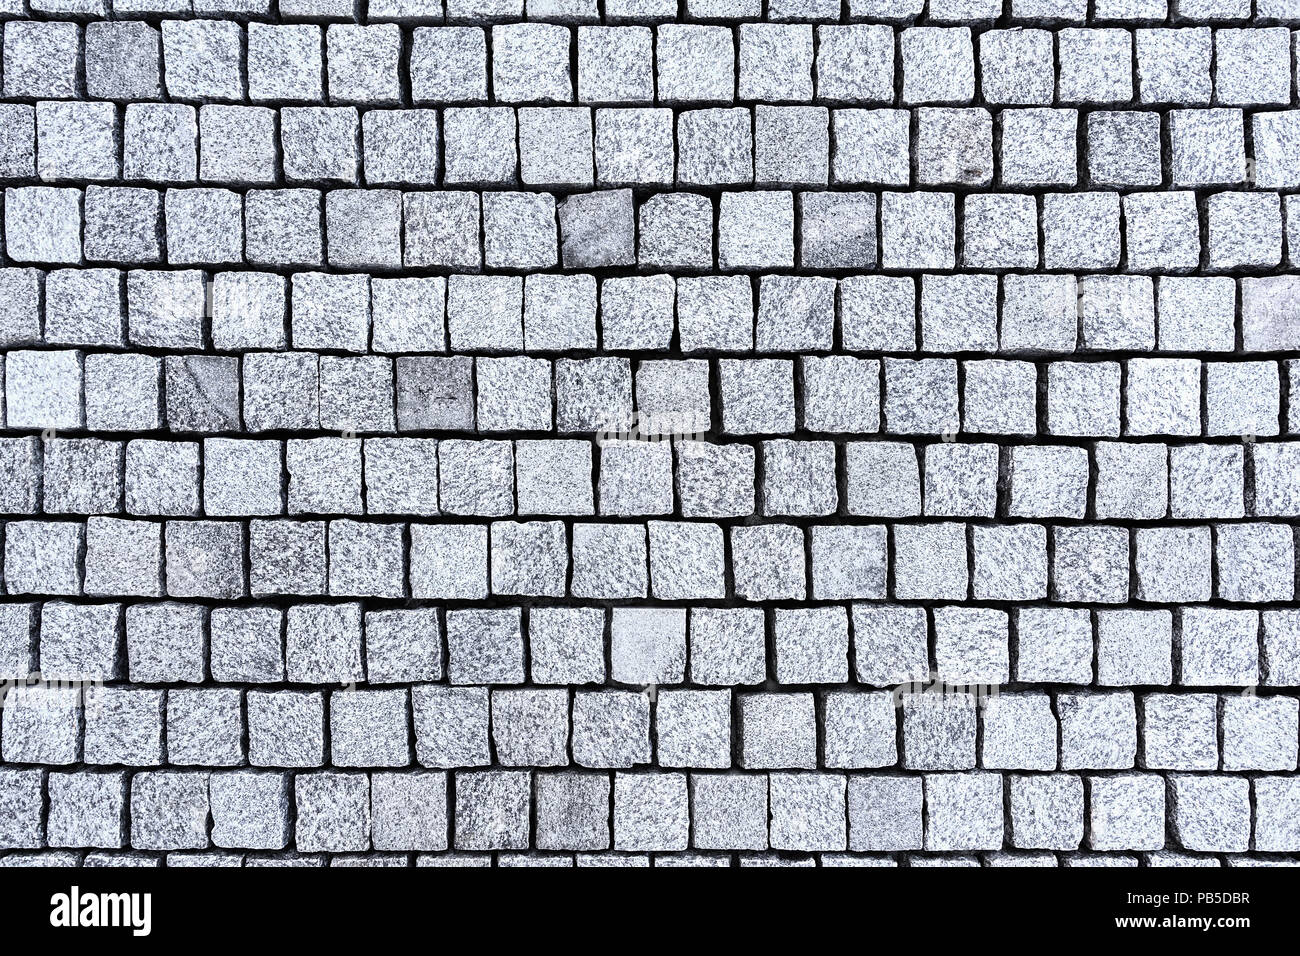 Grey cobble stones paved in lines as a background image. Stock Photo